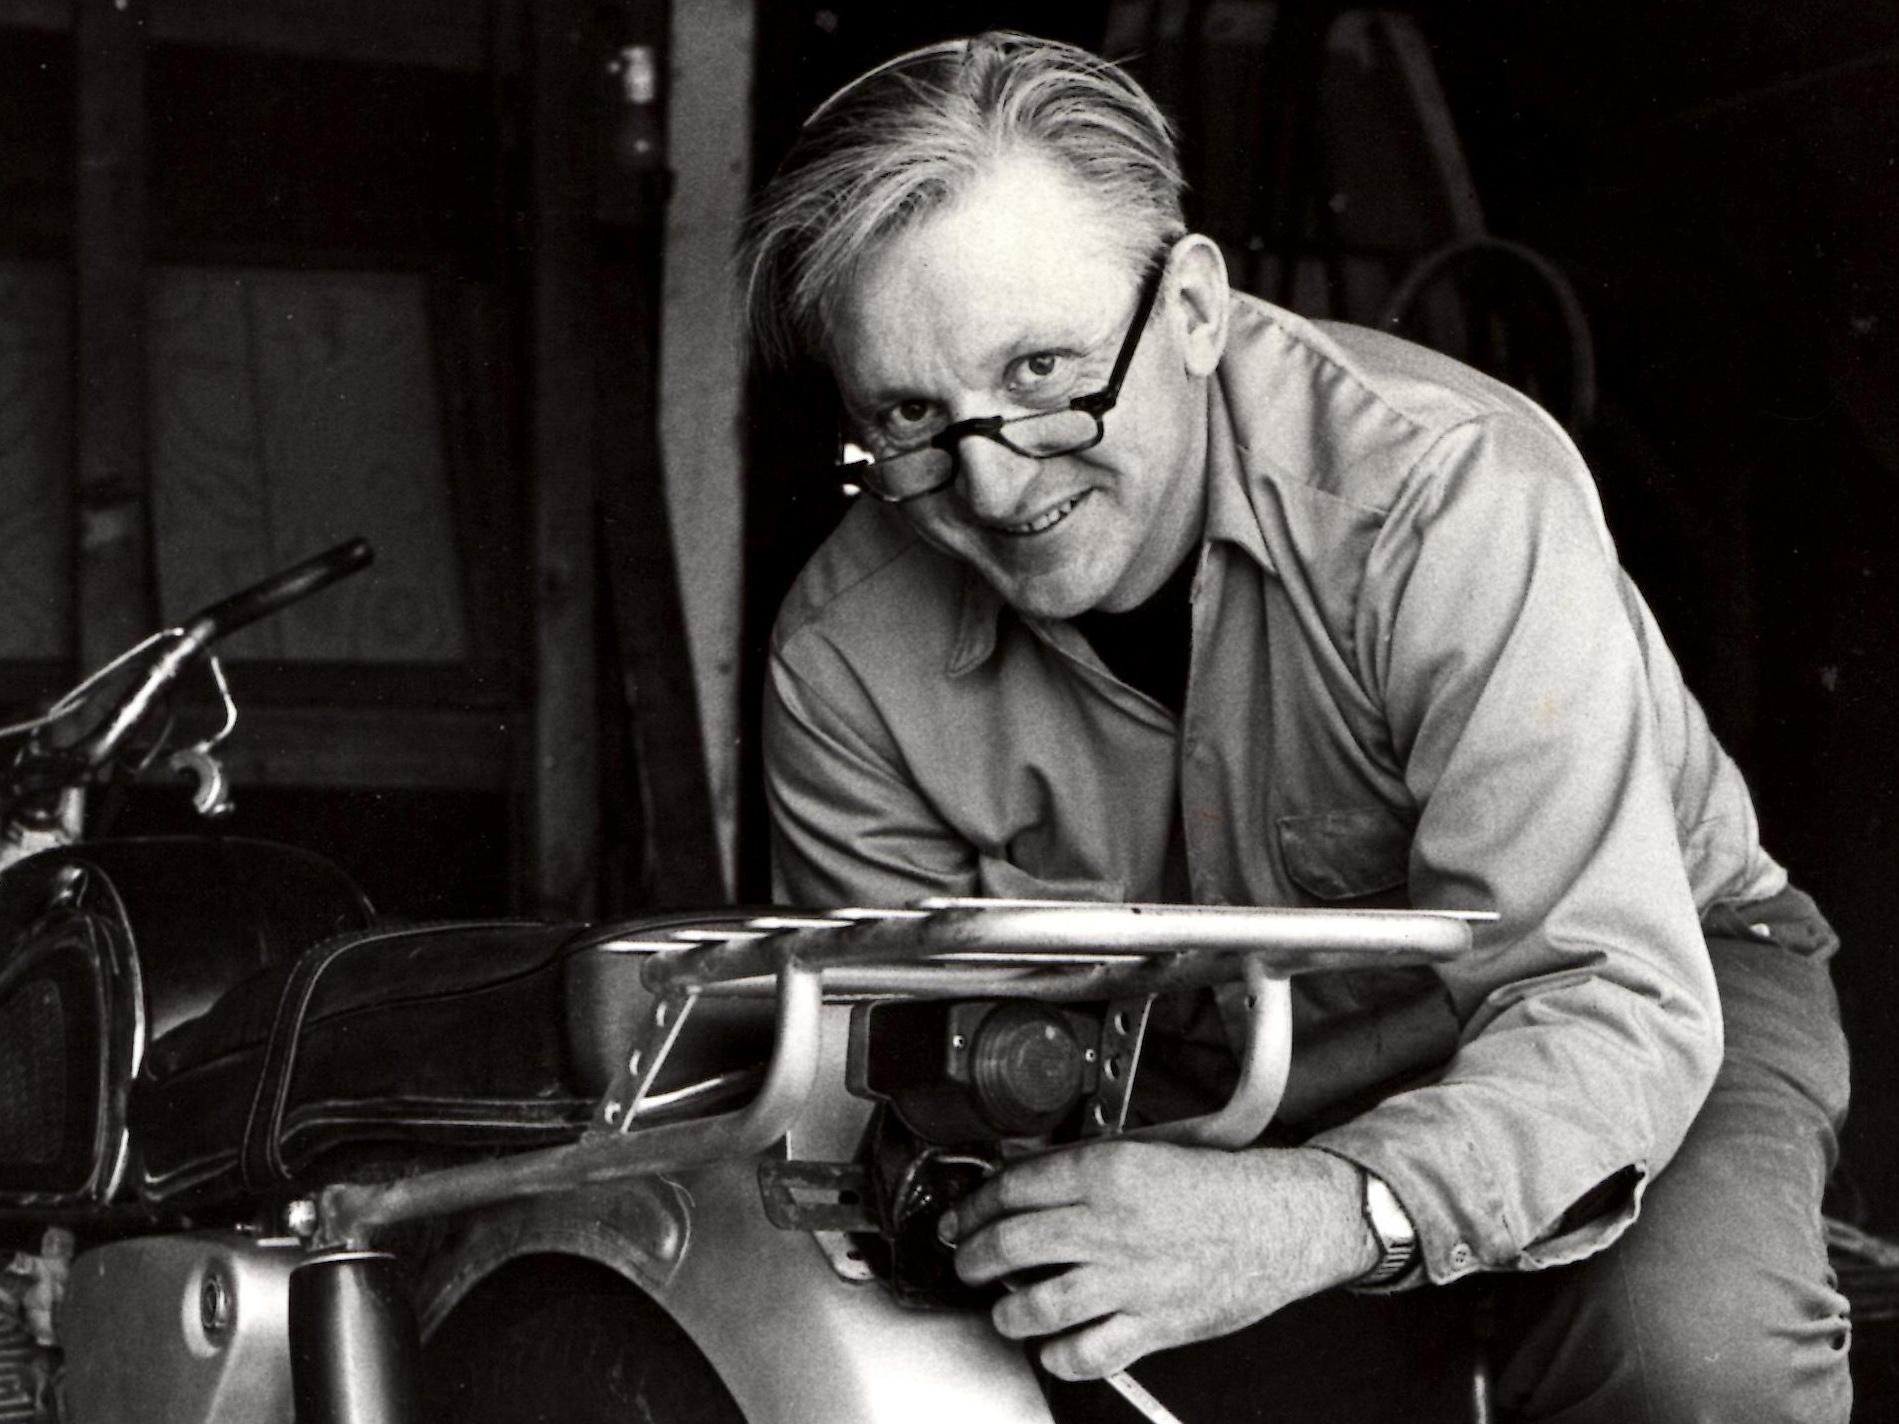 Author Robert M. Pirsig pictured working on his beloved motorcycle in 1975